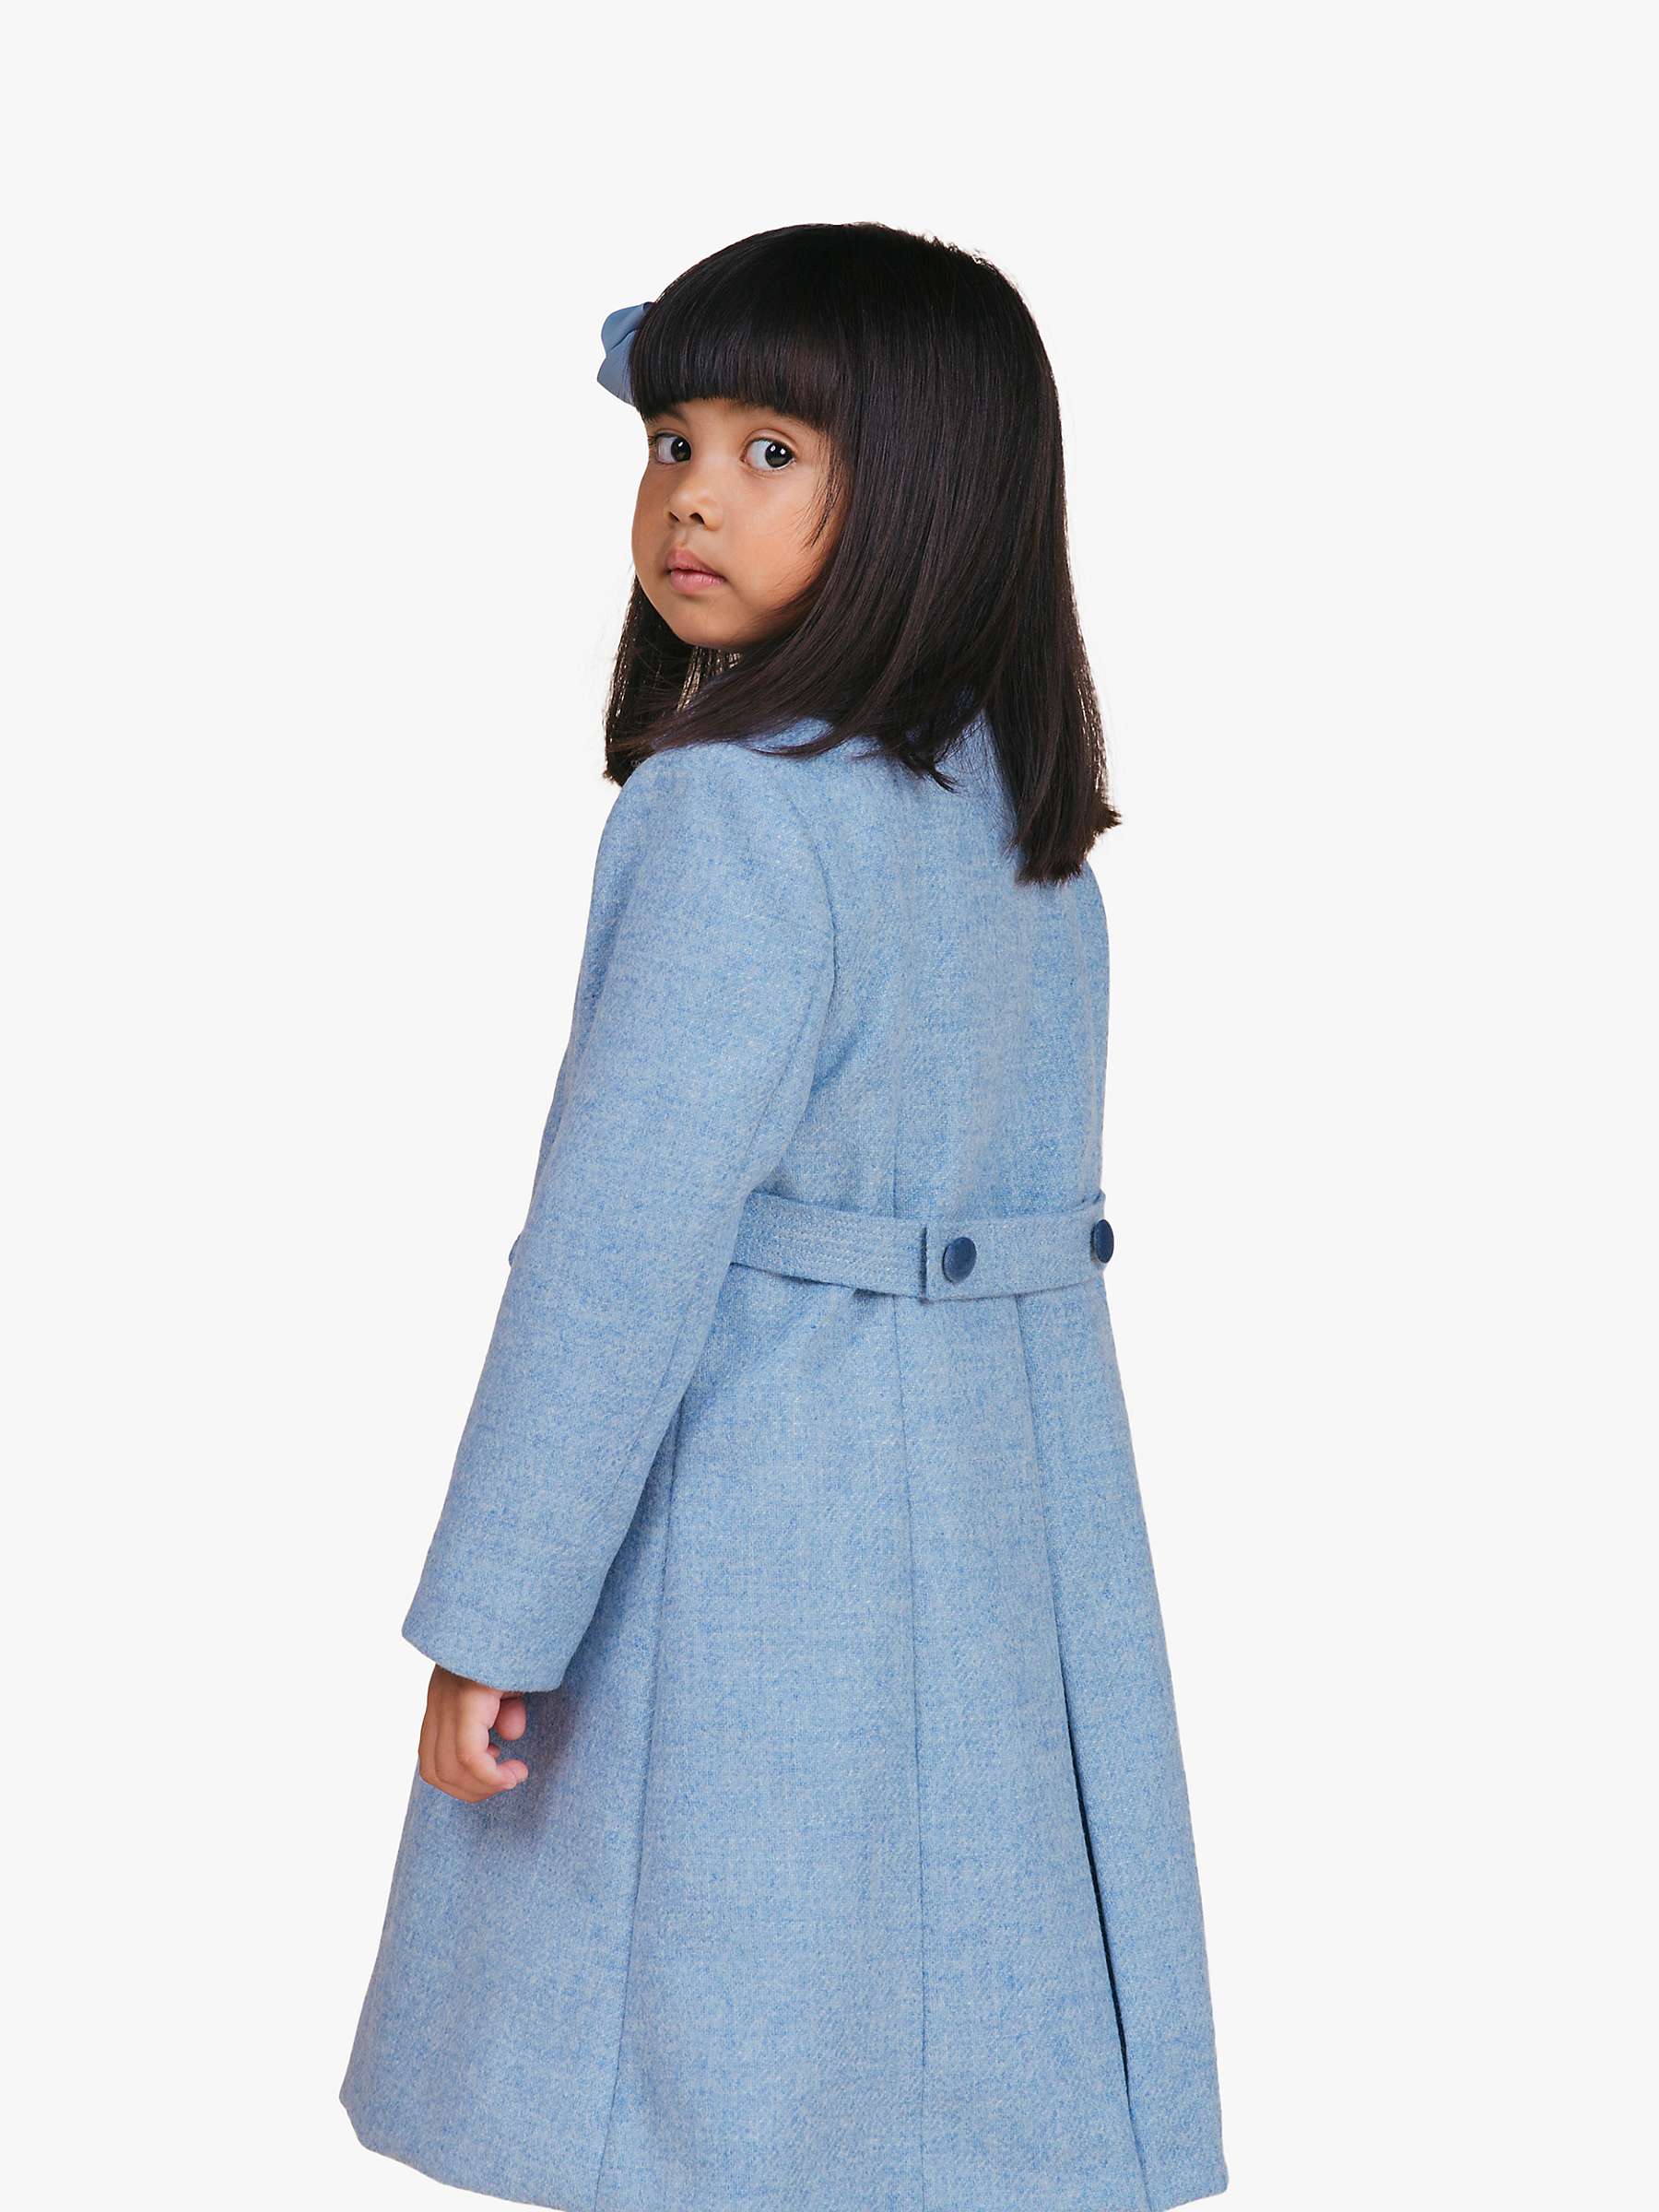 Buy Trotters Heritage Kids' Classic Longline Double Breasted Coat Online at johnlewis.com